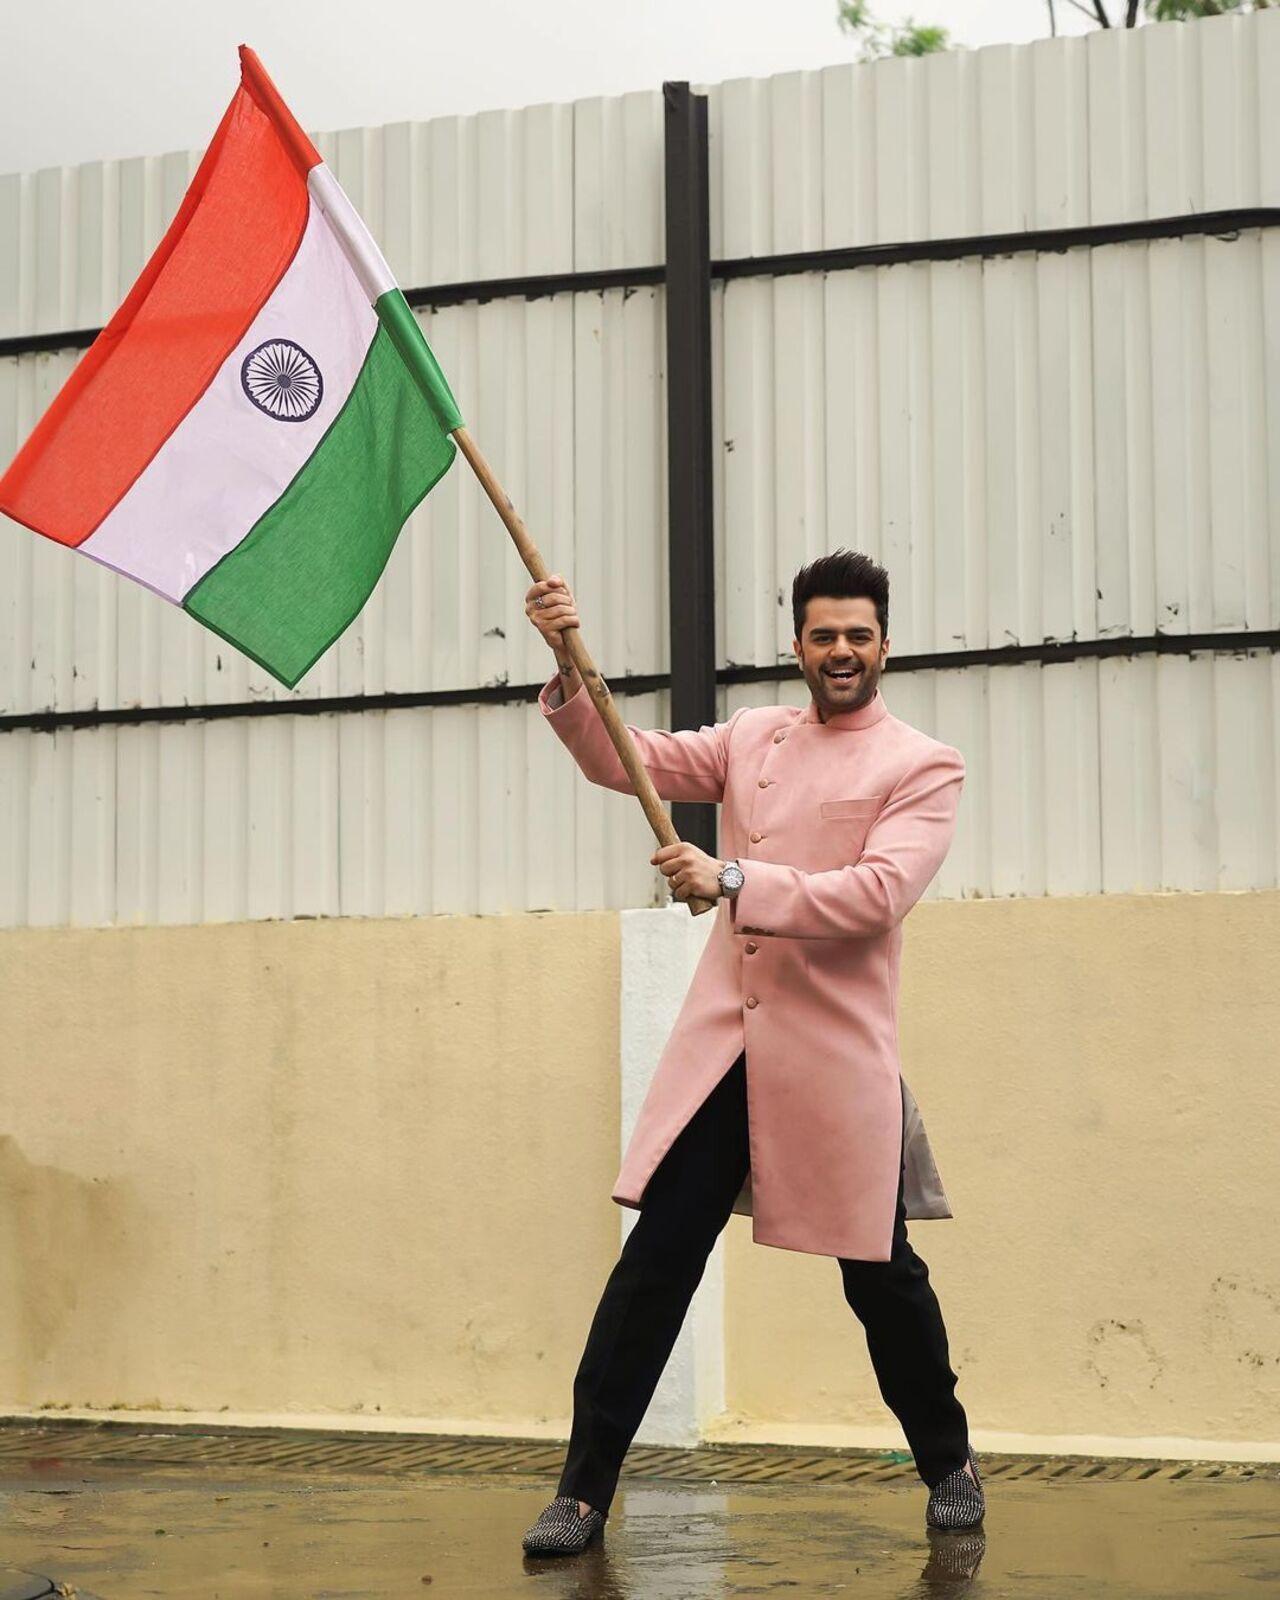 Maniesh Paul shared a picture of himself waving the Indian tricolour with immense pride